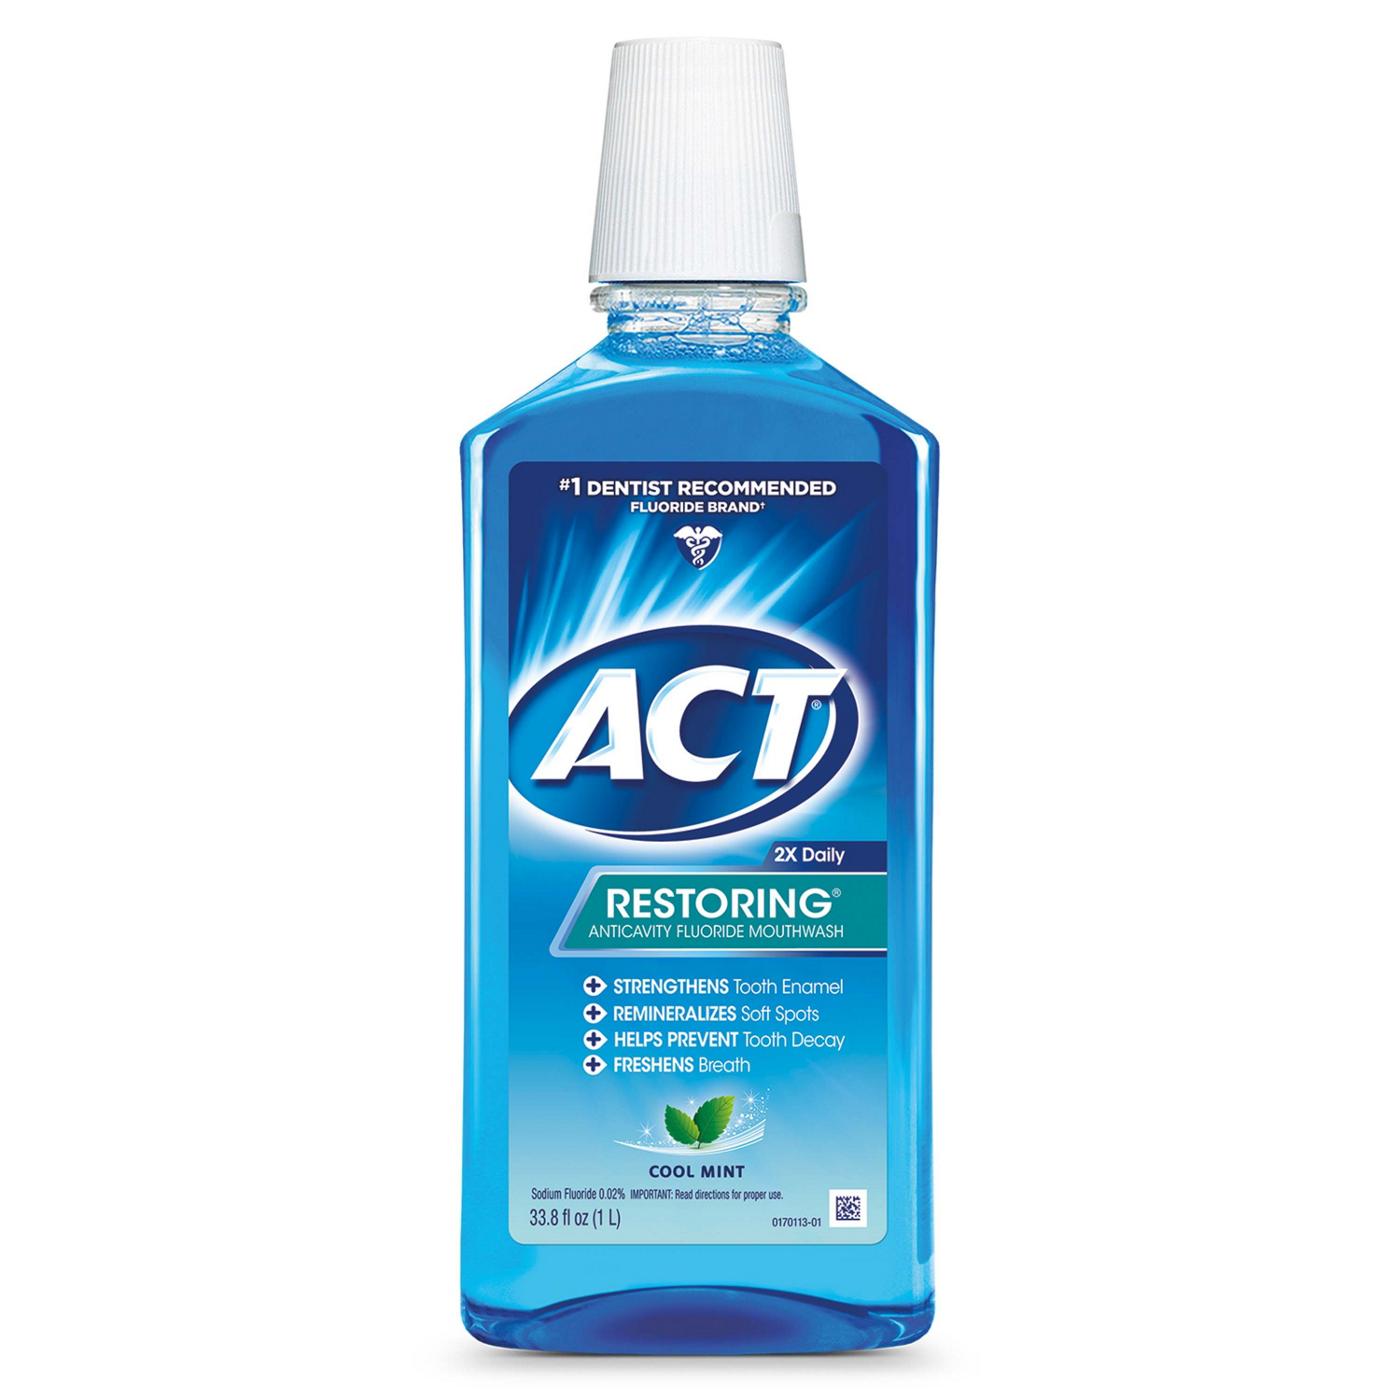 ACT Restoring Anticavity Fluoride Mouthwash - Cool Mint; image 1 of 5